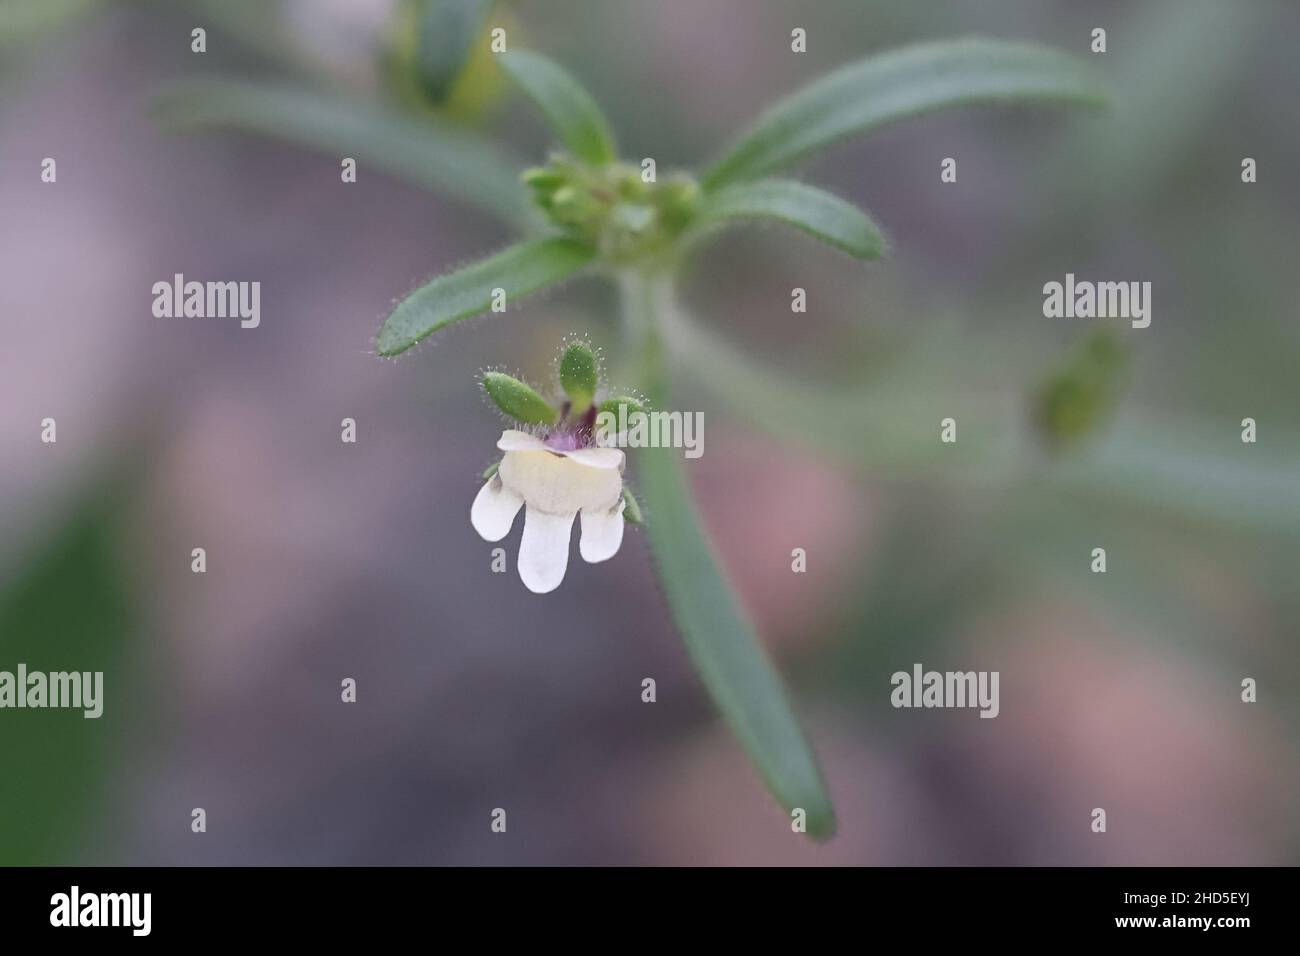 Chaenorhinum minus, commonly known as Small Toadflax or Dwarf snapdragon, wild plant from Finland Stock Photo